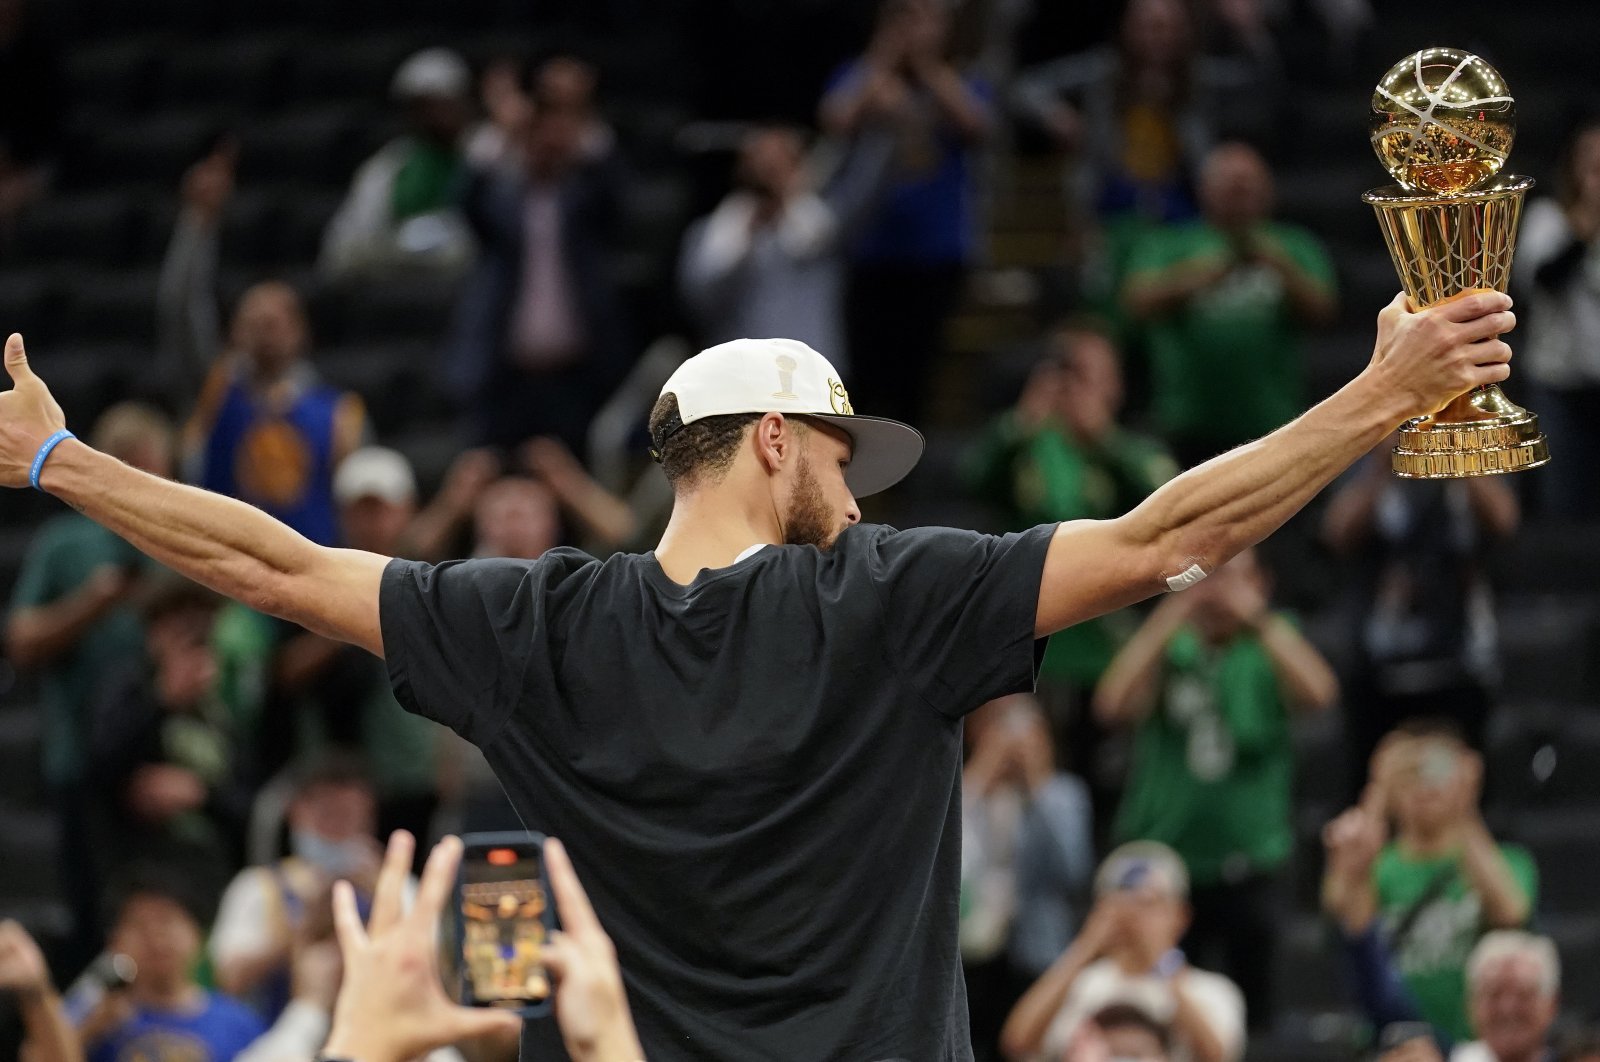 Golden State Warriors guard Stephen Curry celebrates with the Bill Russell Trophy for most valuable player after the game, in Boston, United States, Jun. 16, 2022. (AP PHOTO) 